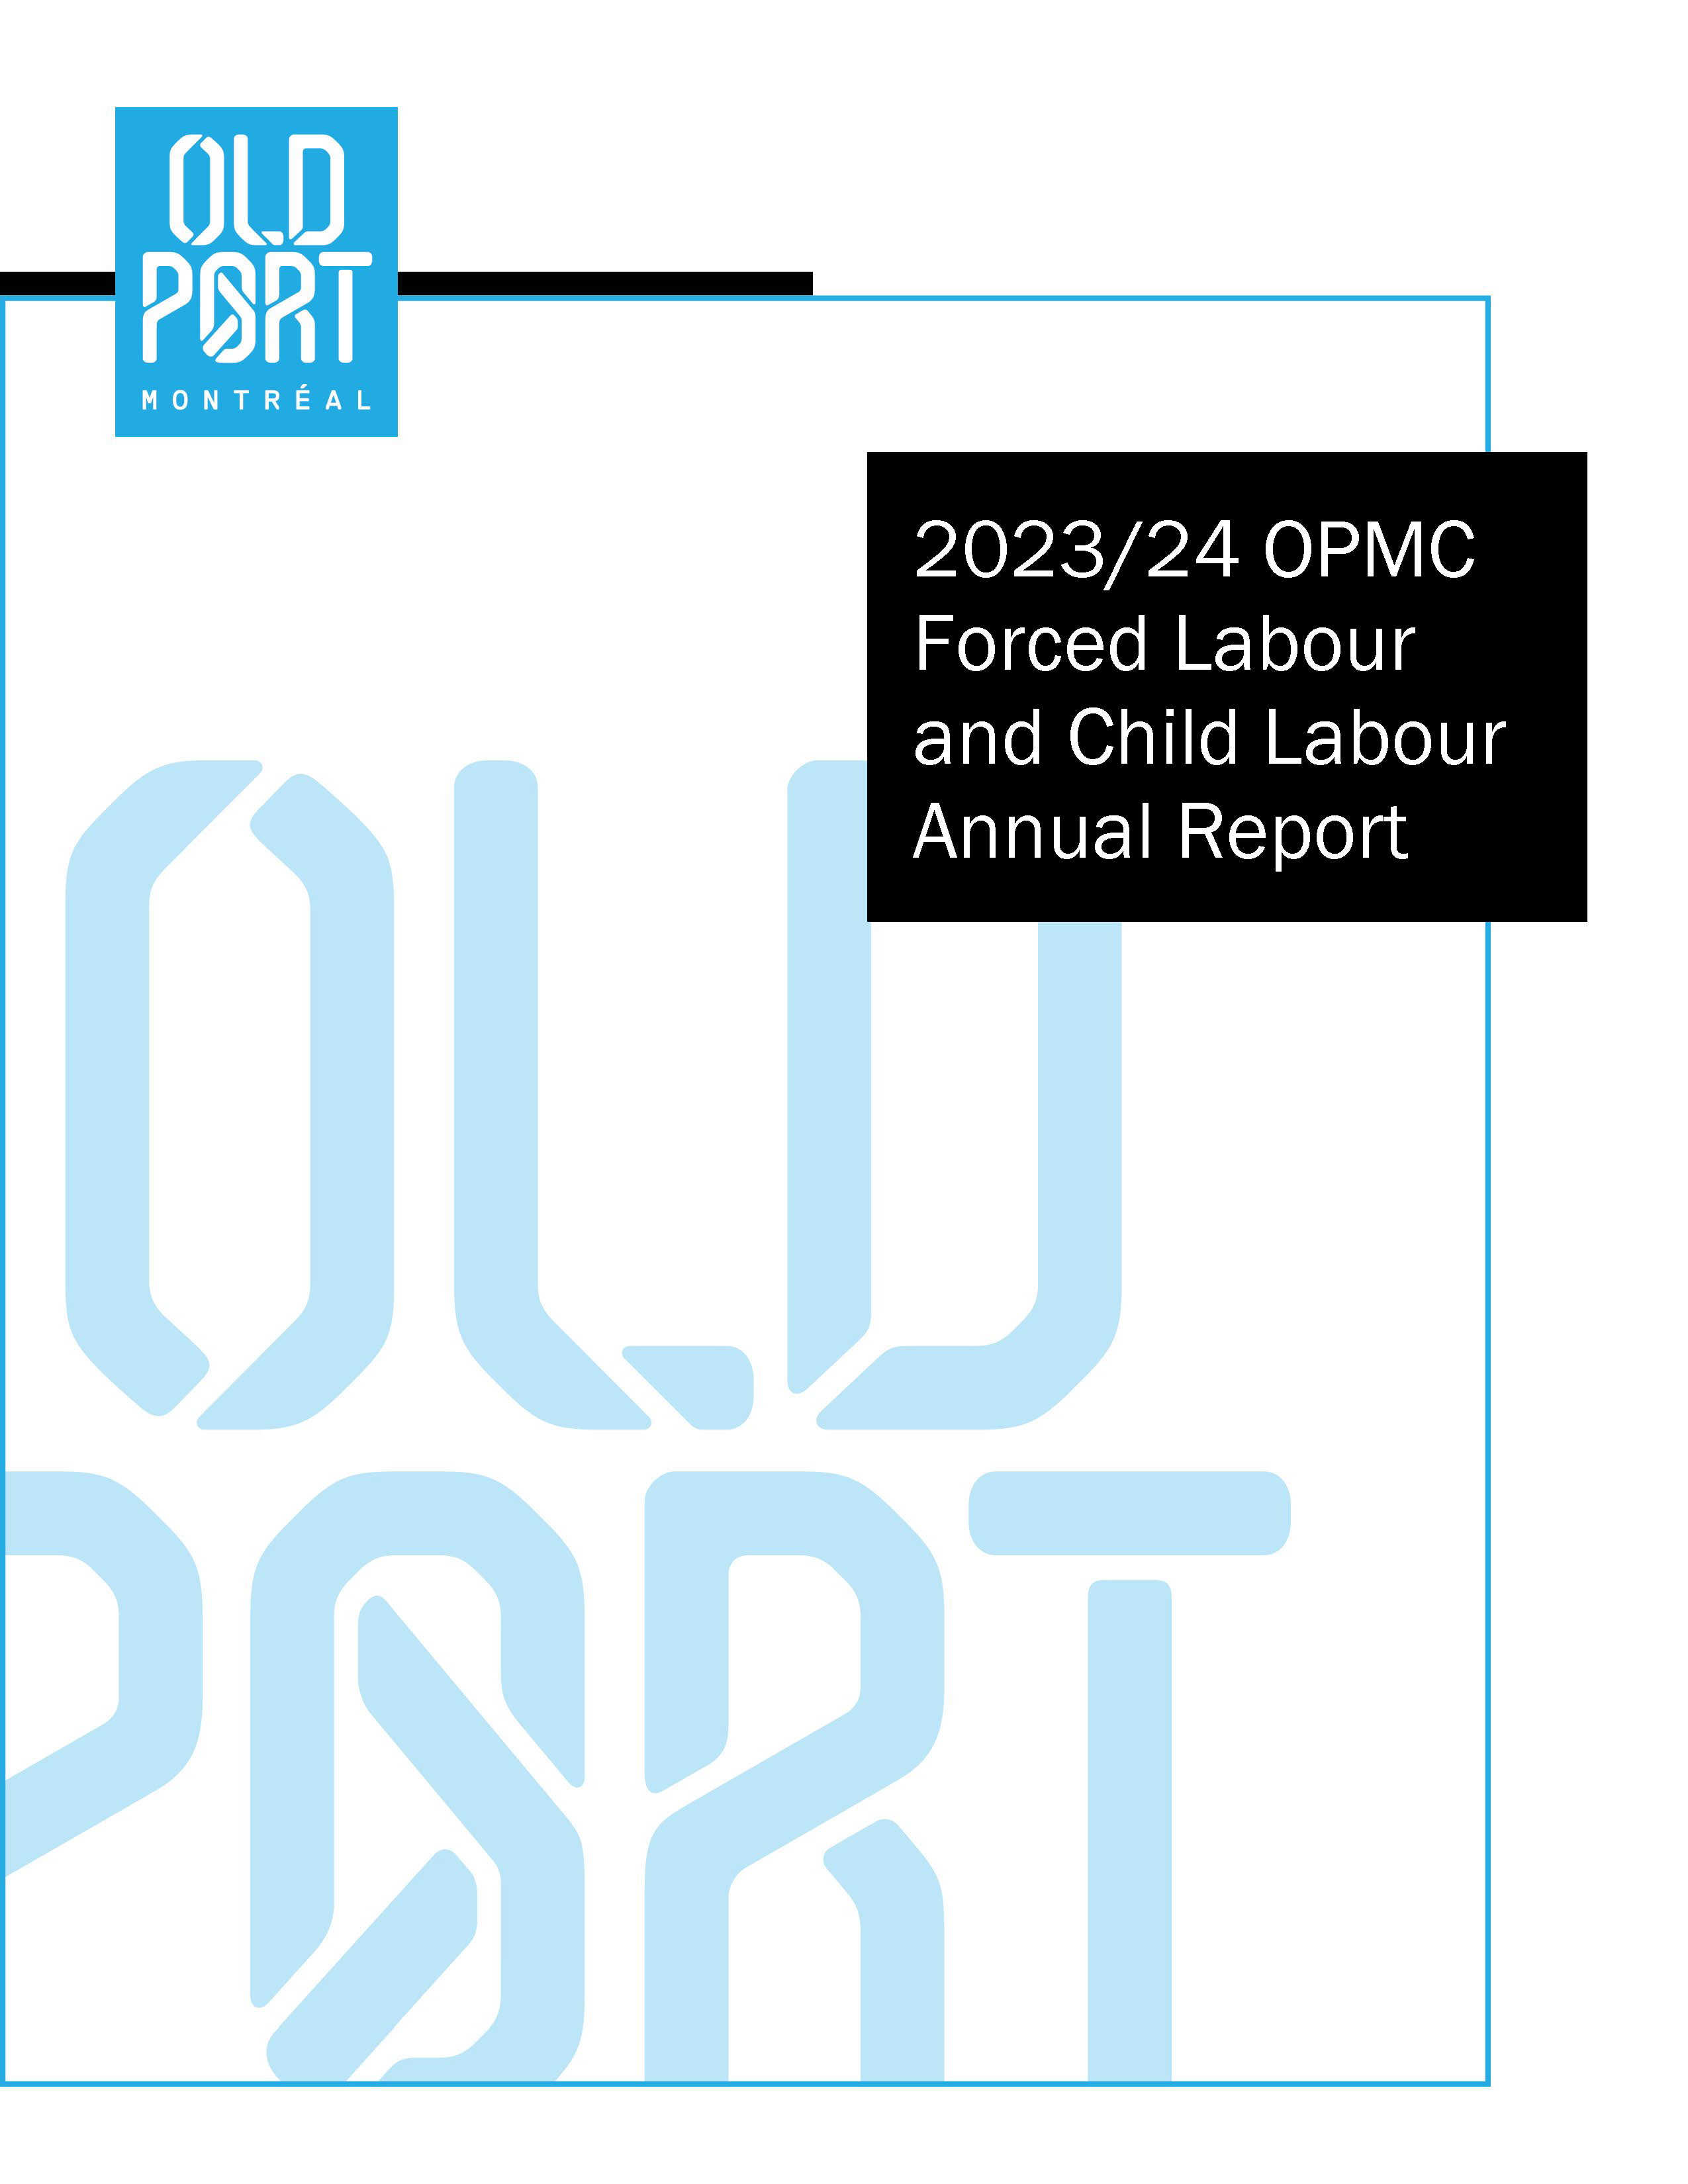 Report cover page for OPMC 2023-24 Forced Labour and Child Labour Annual Report